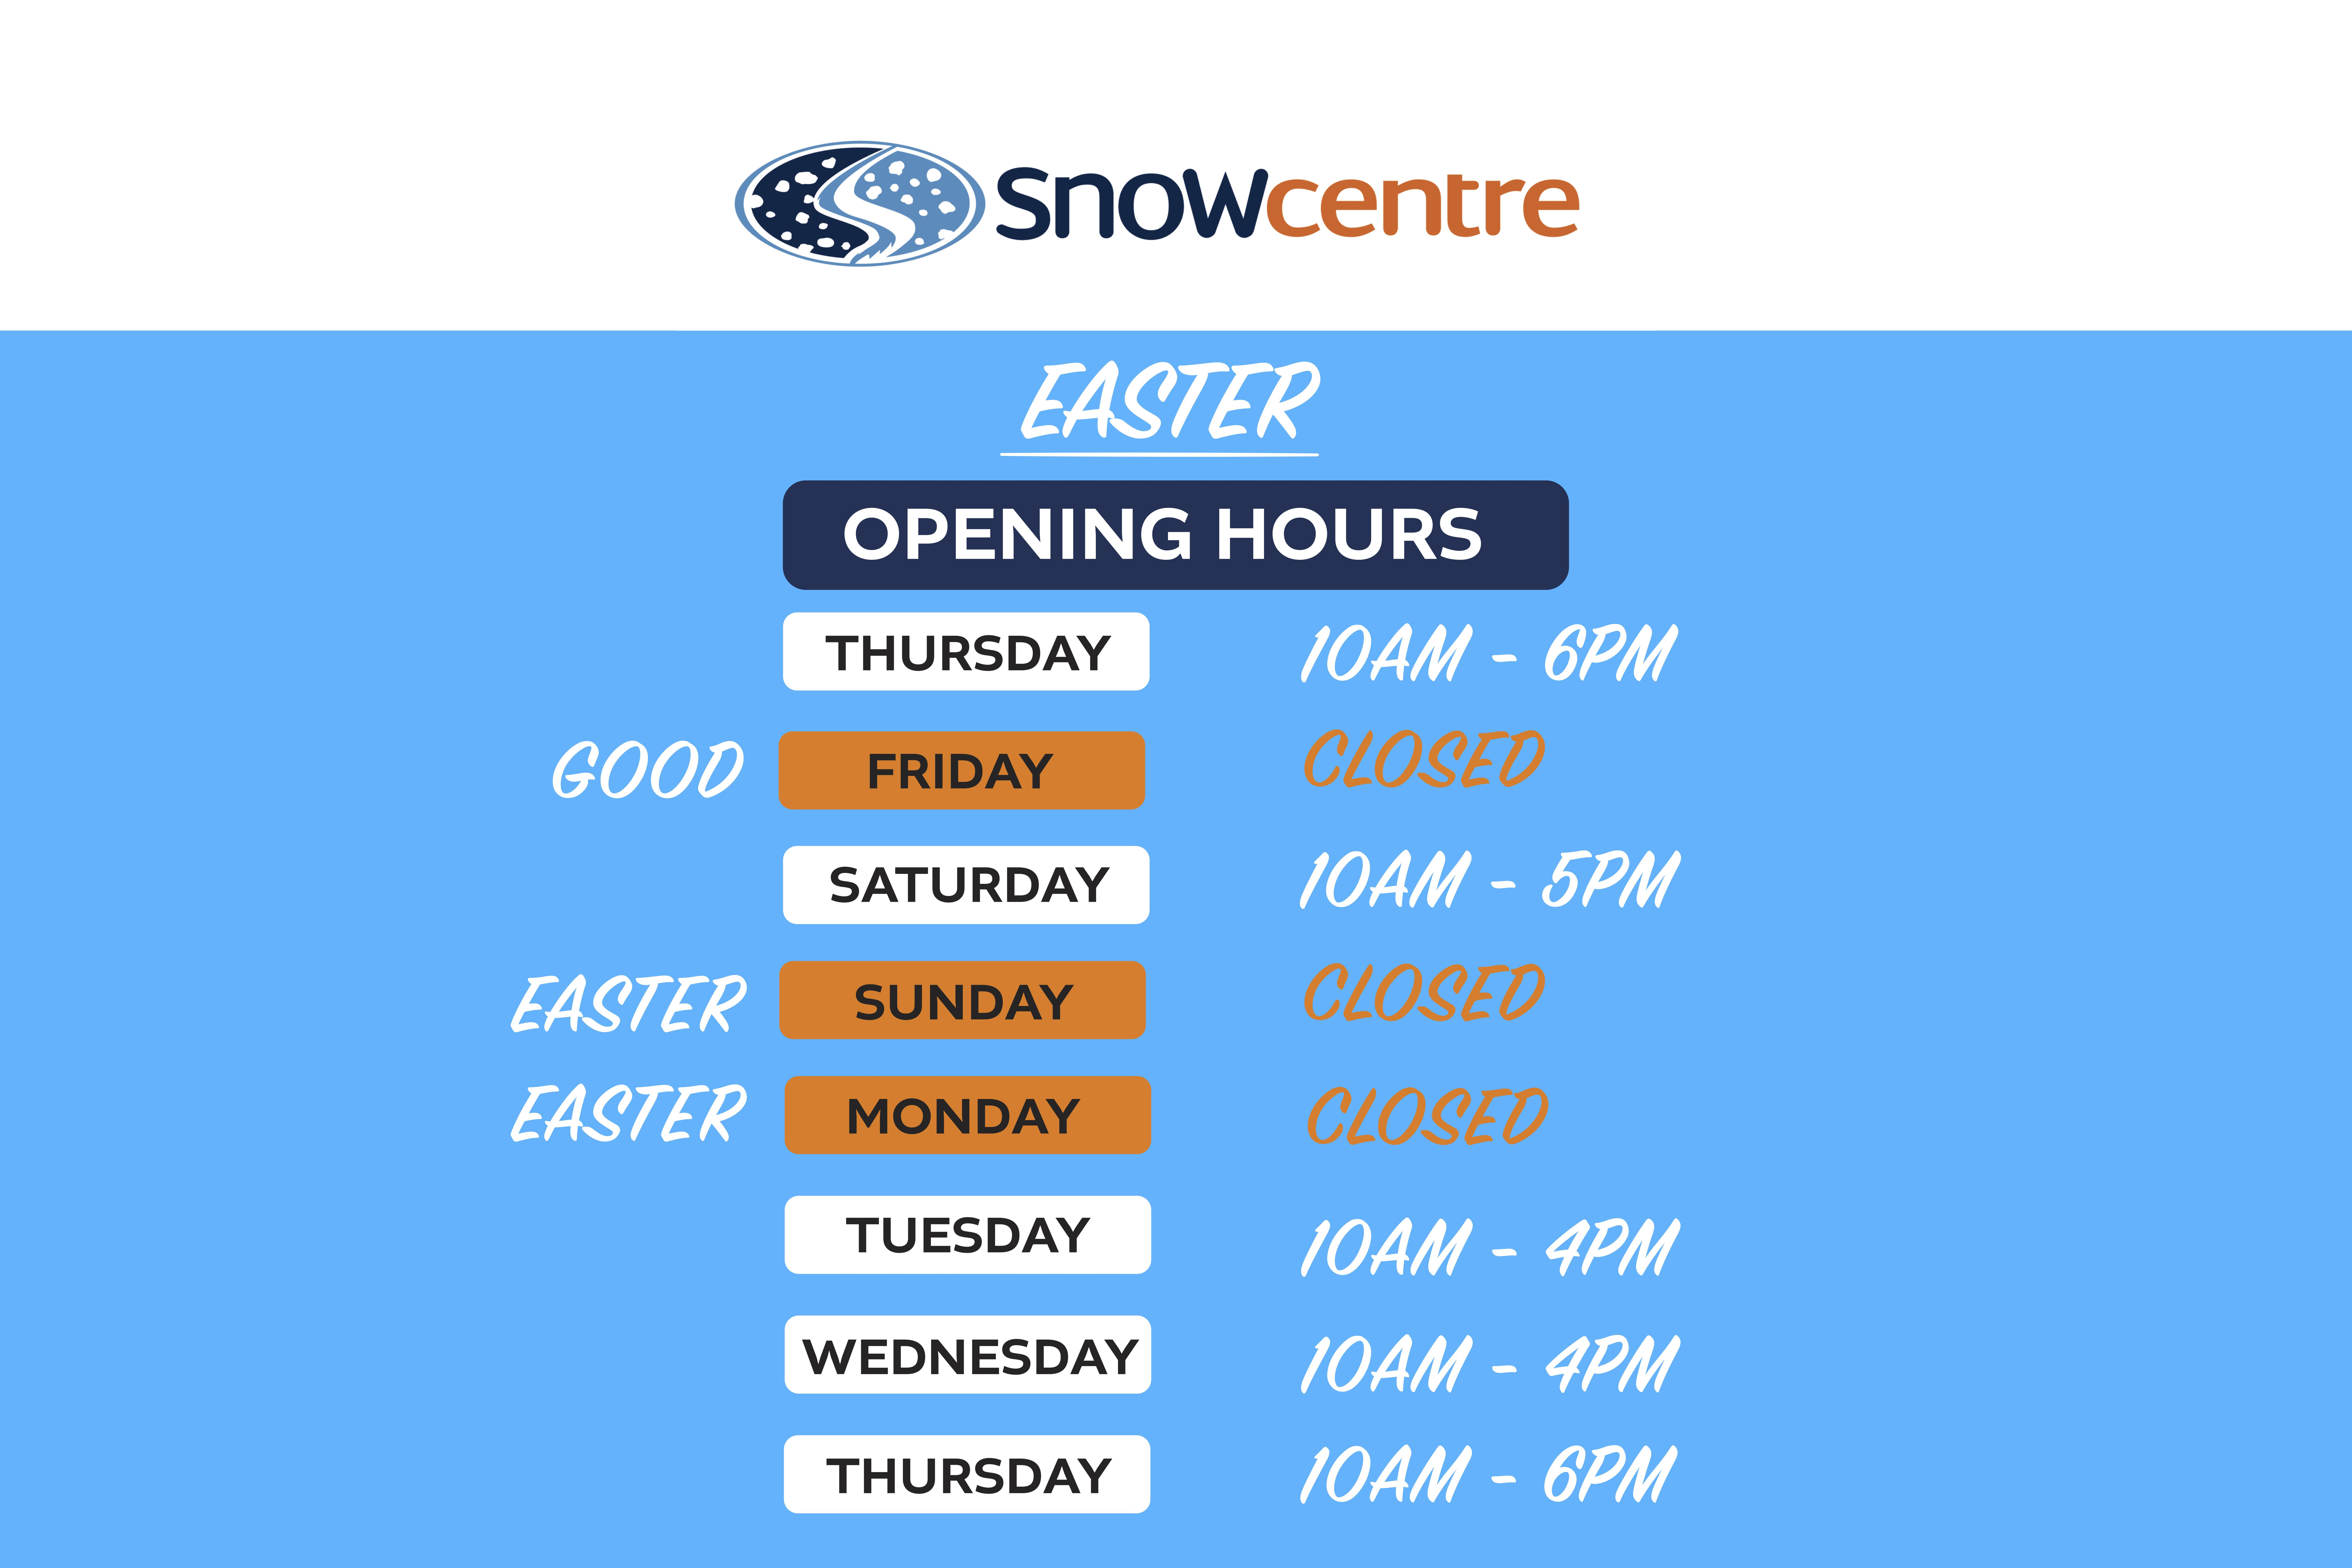 easter hours